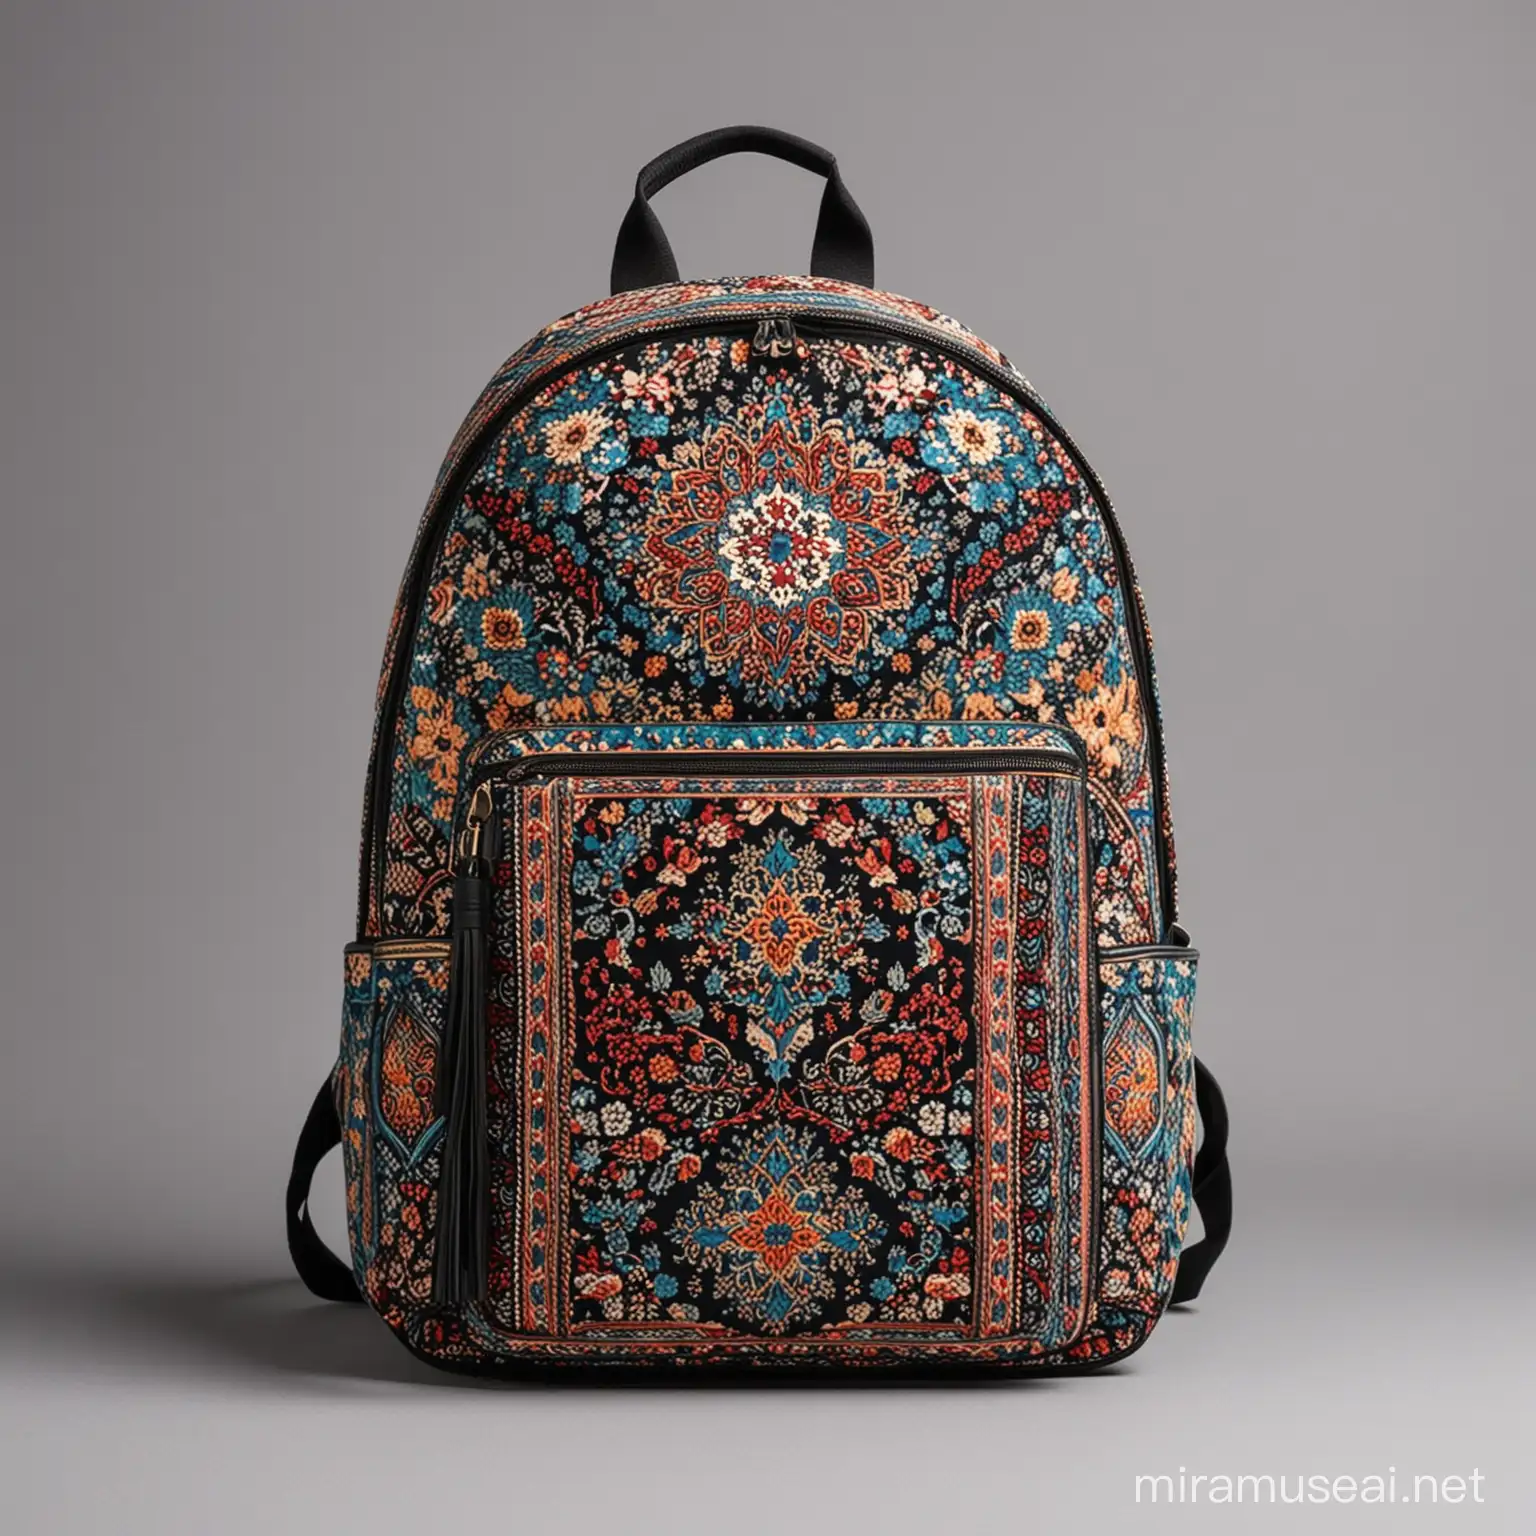 Logo: Creative backpack made of Persian patterns.